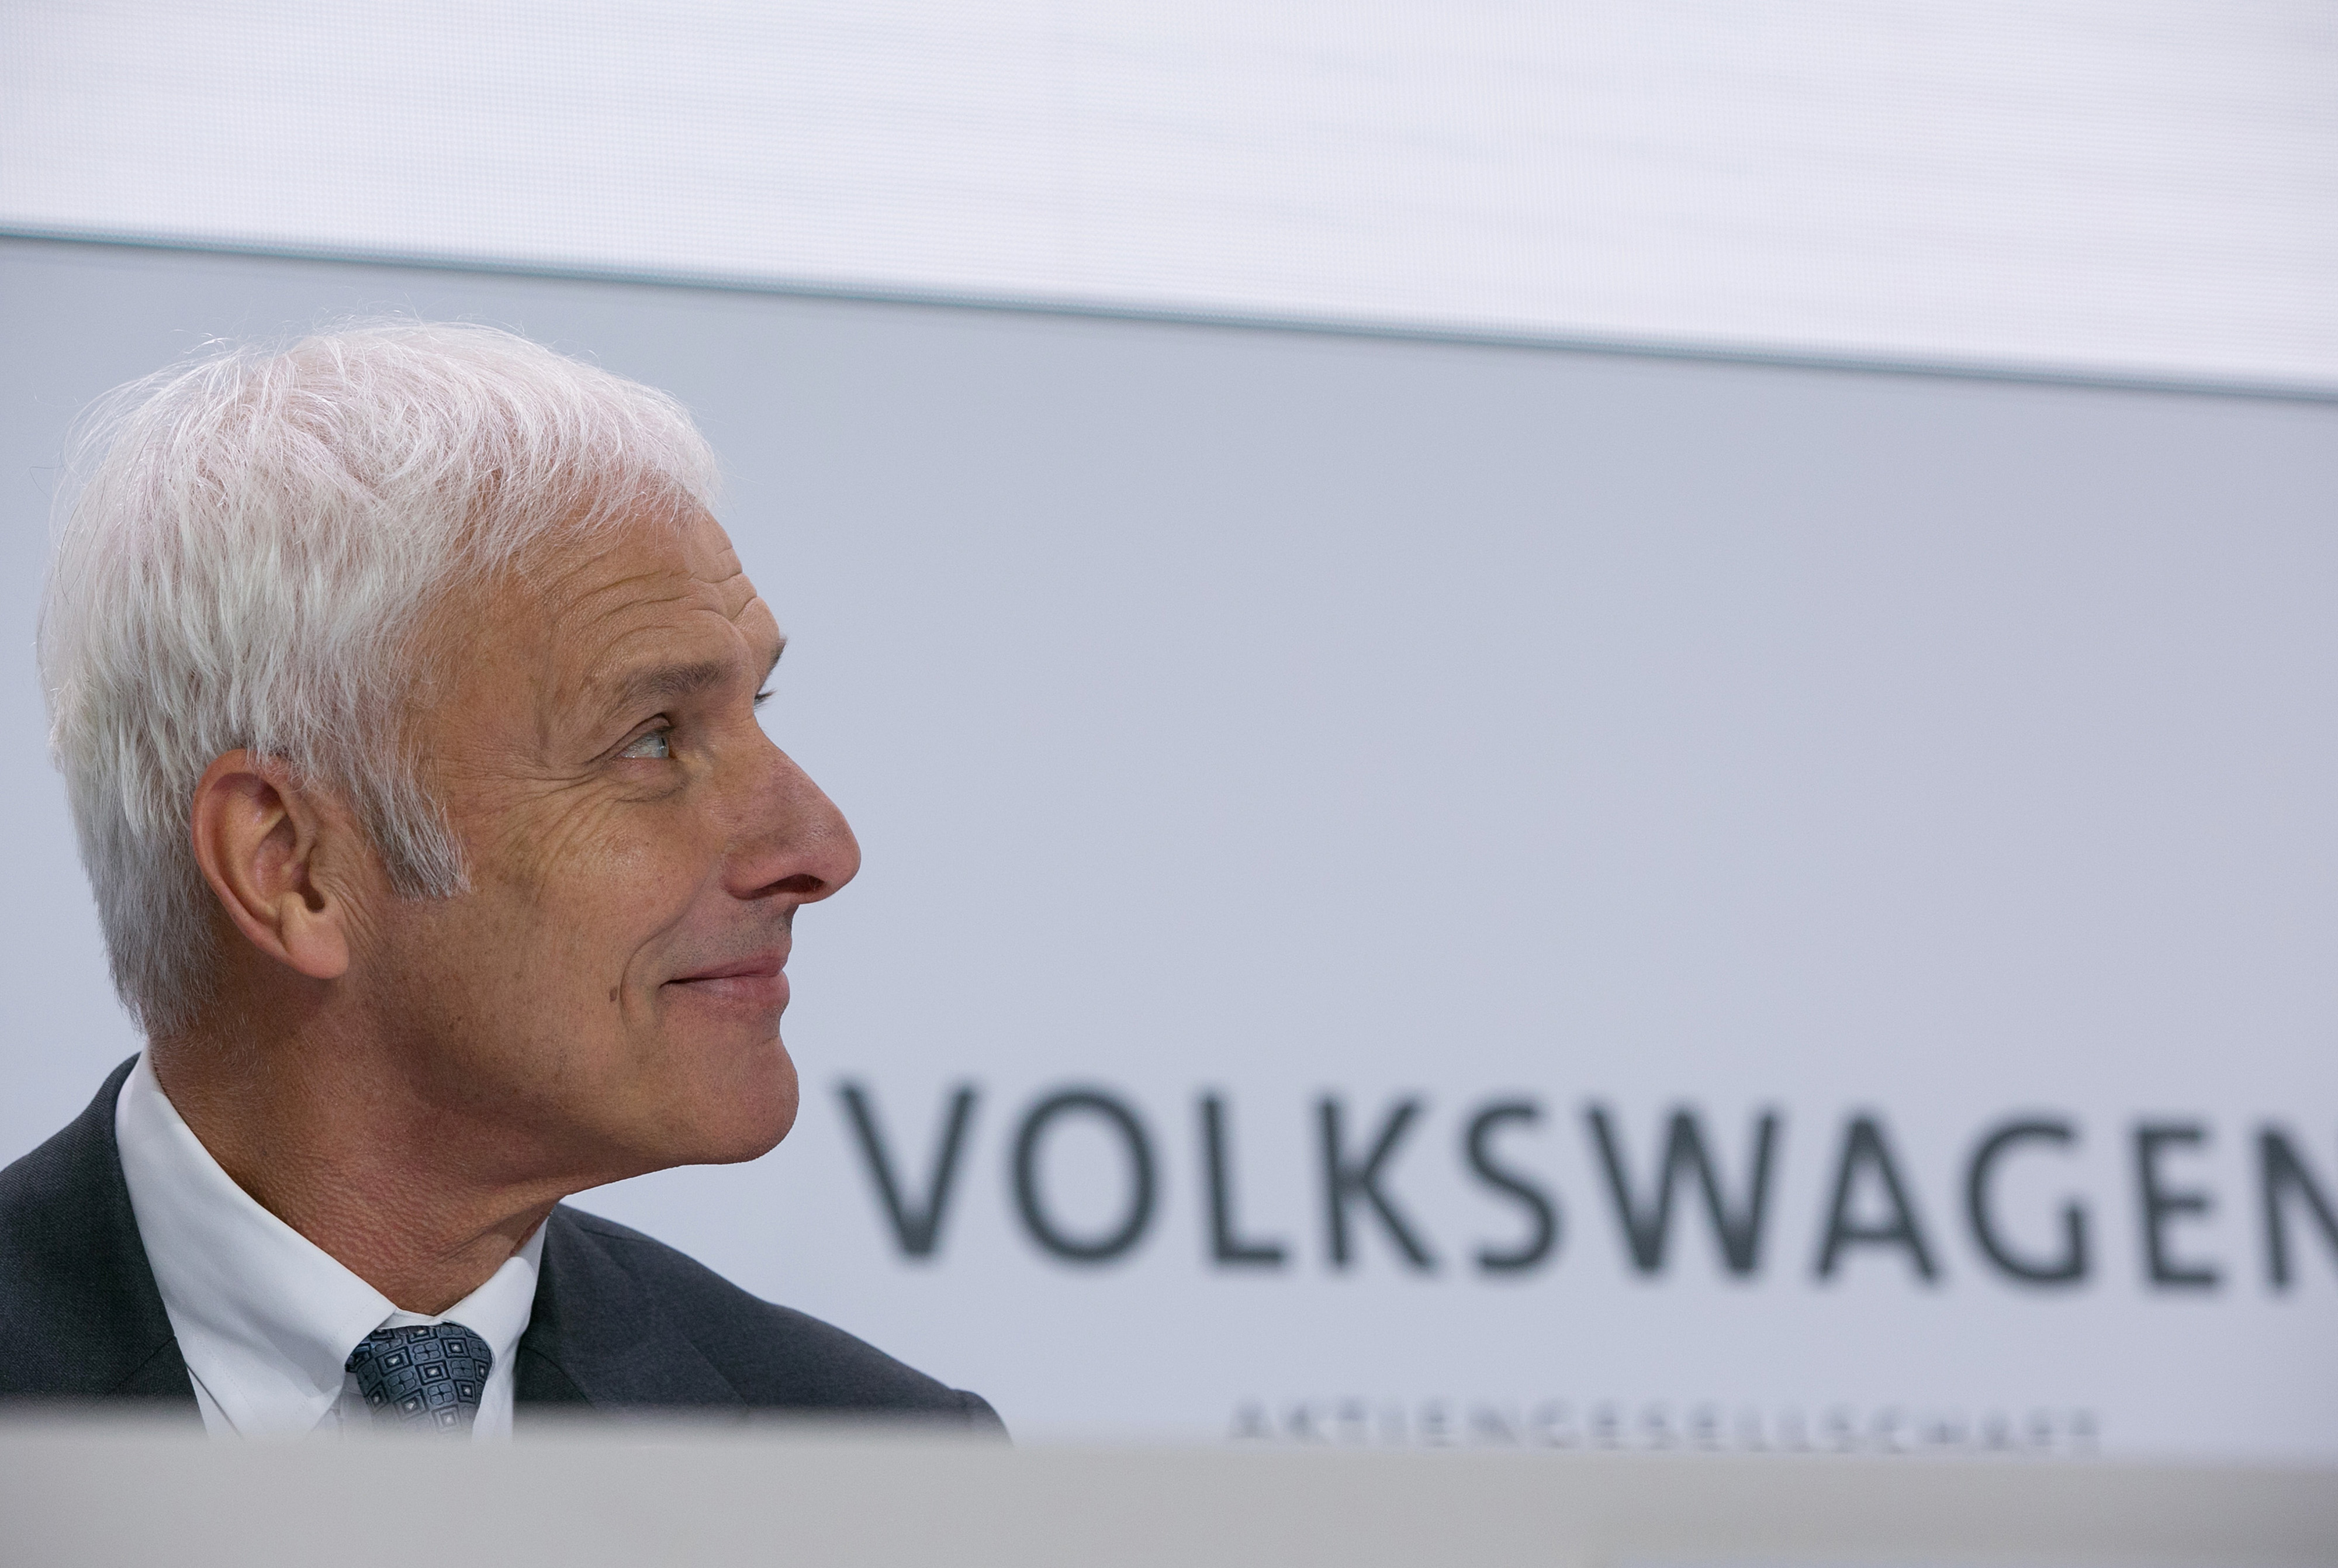 VW's Biggest Brand Stumbles to Loss on Emissions Crisis